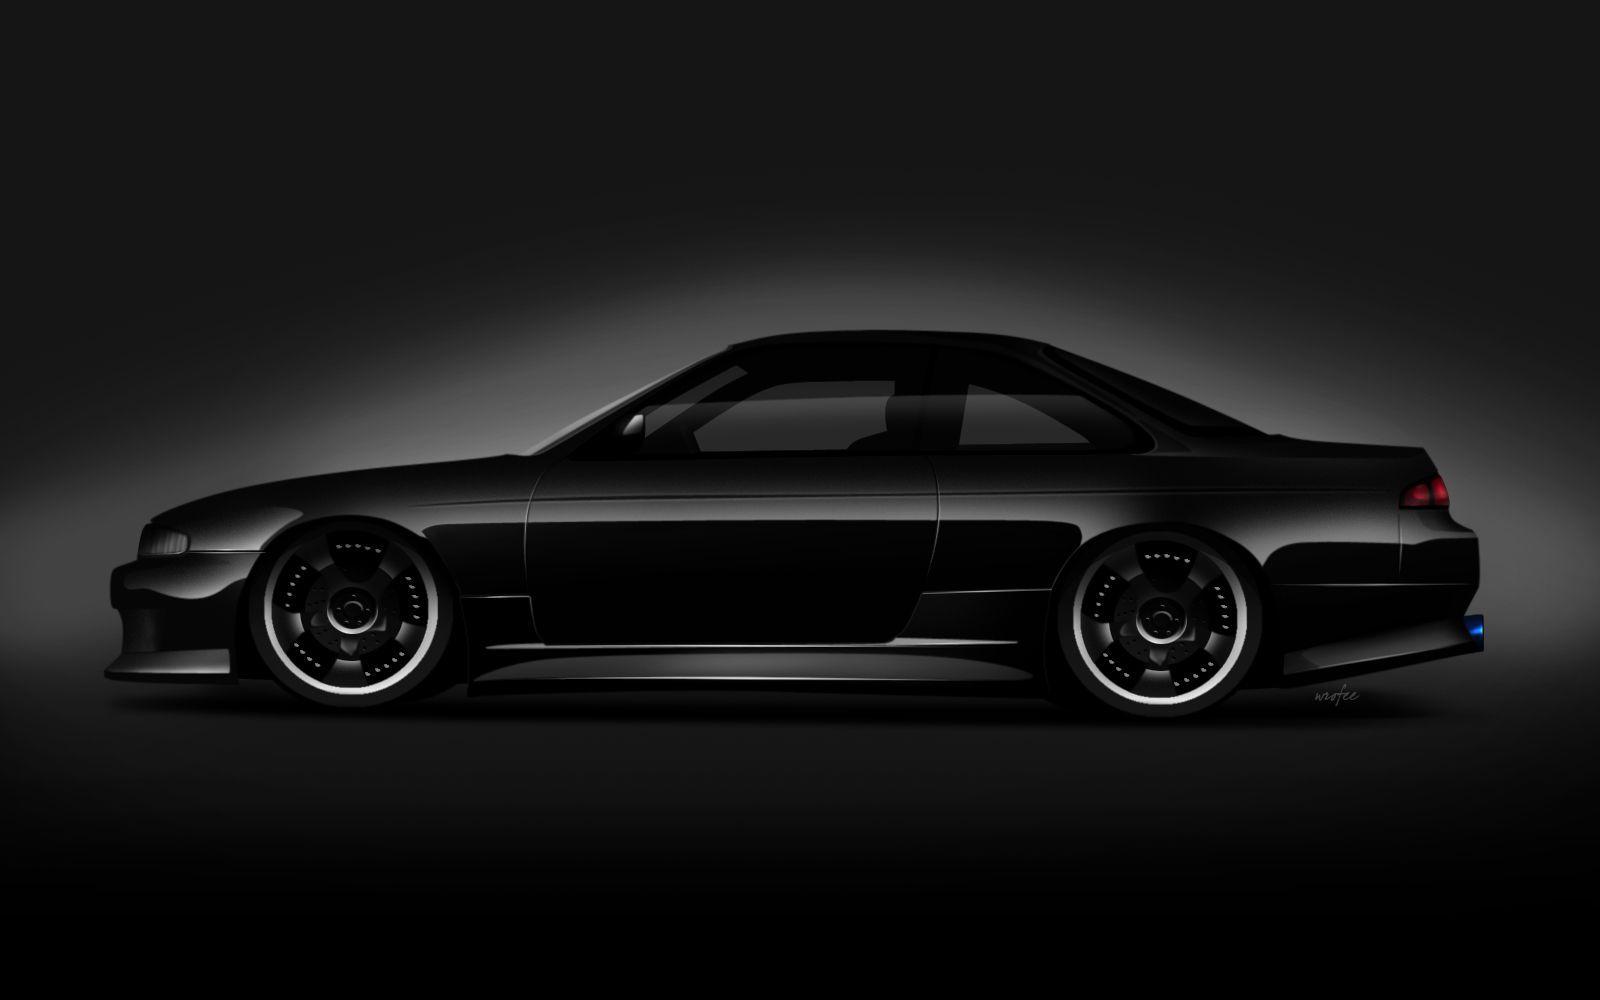 Wallpaper car auto night Nissan tuning S14 240sx Nissan silvia  images for desktop section nissan  download